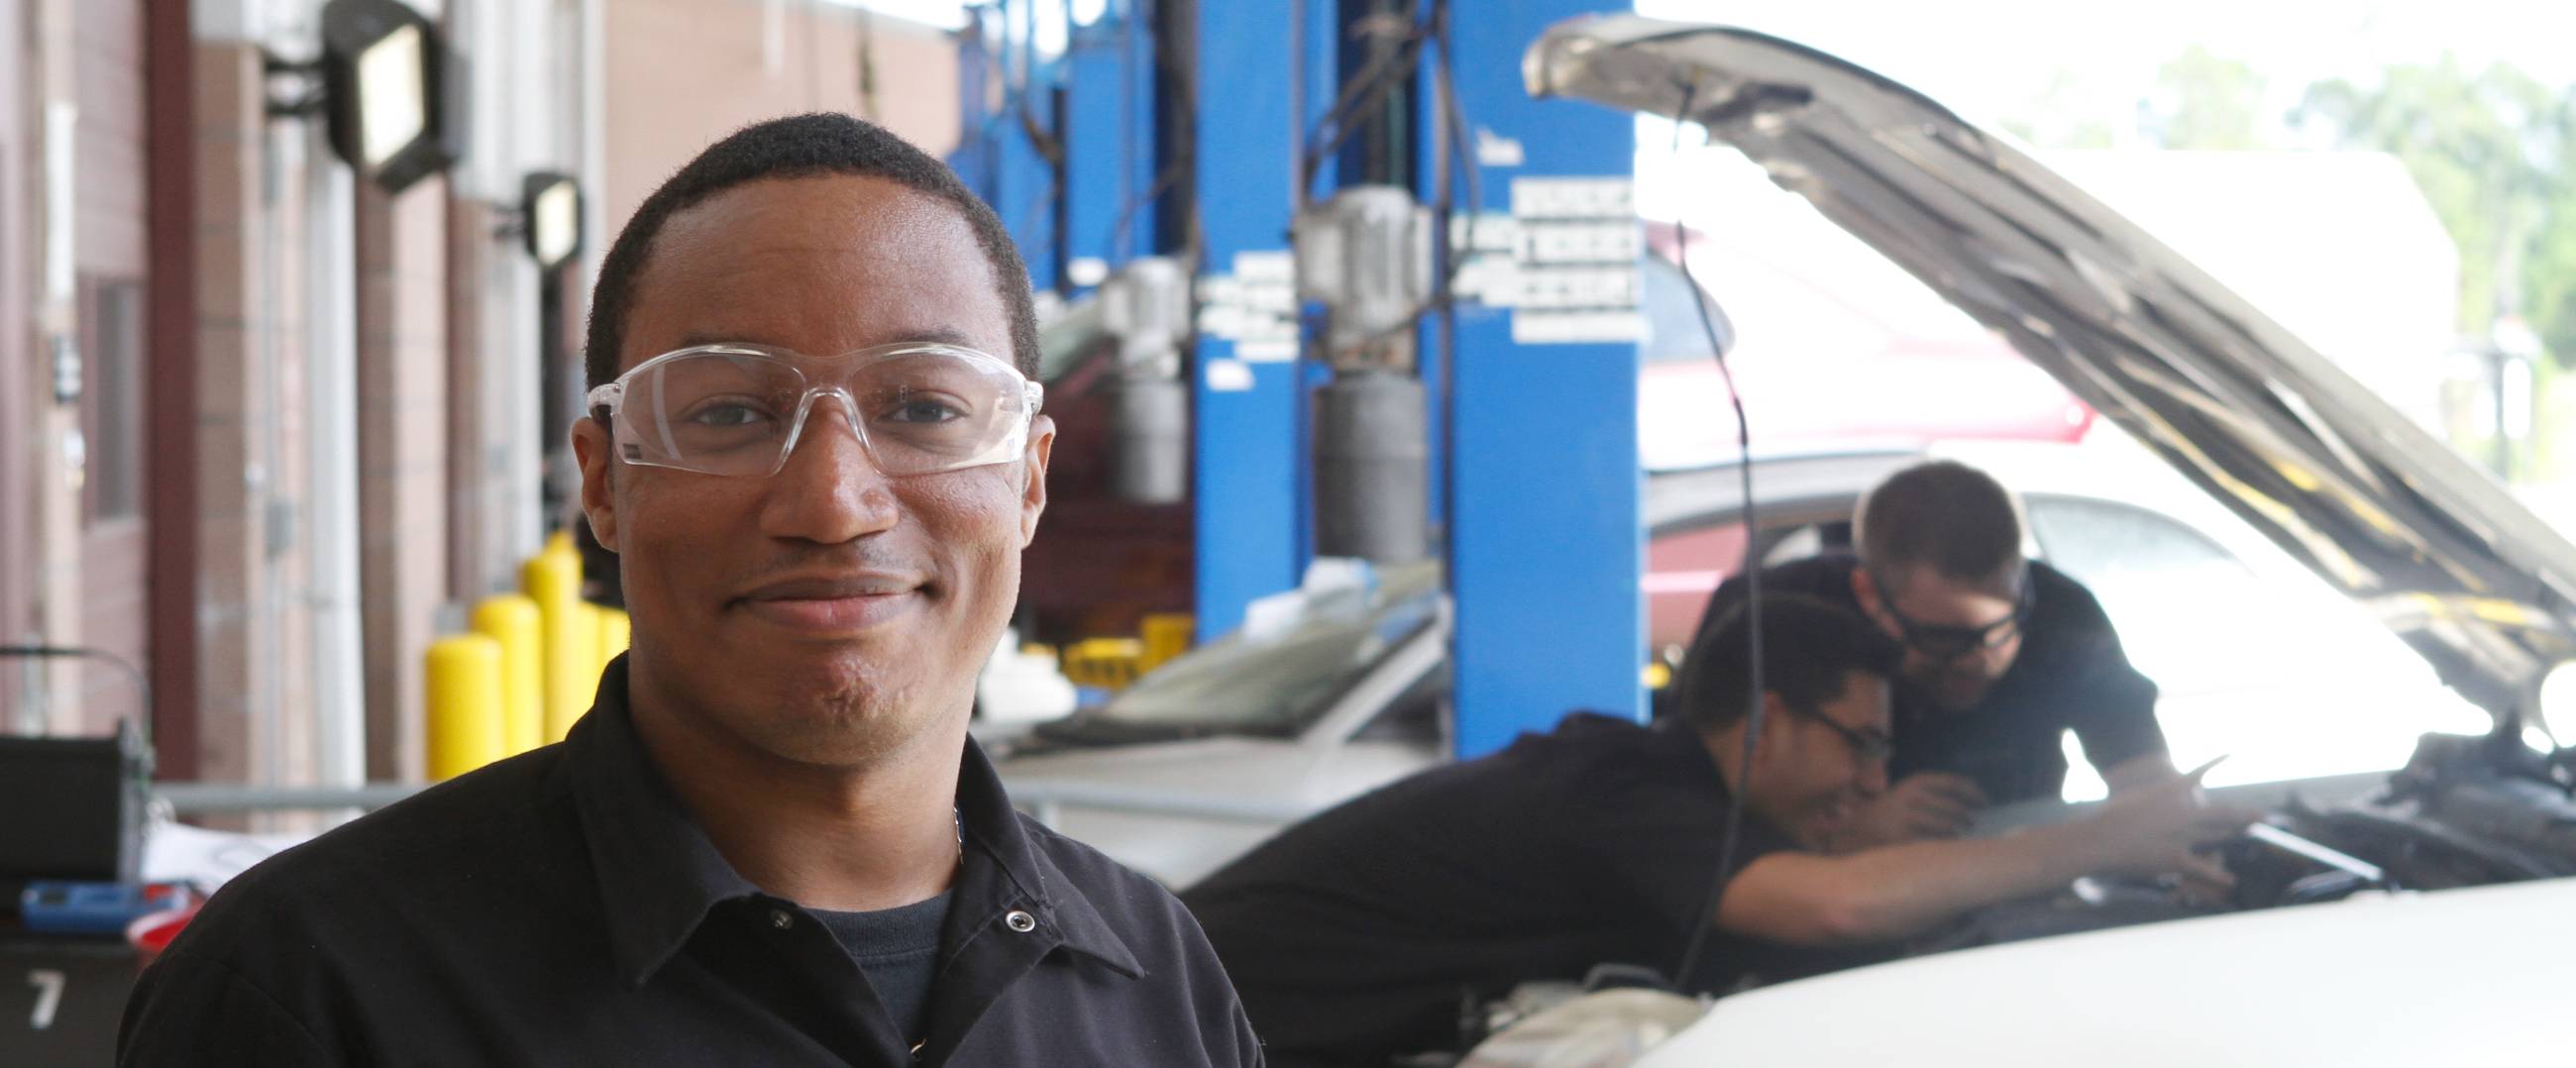 student with safety glasses in automotive bay